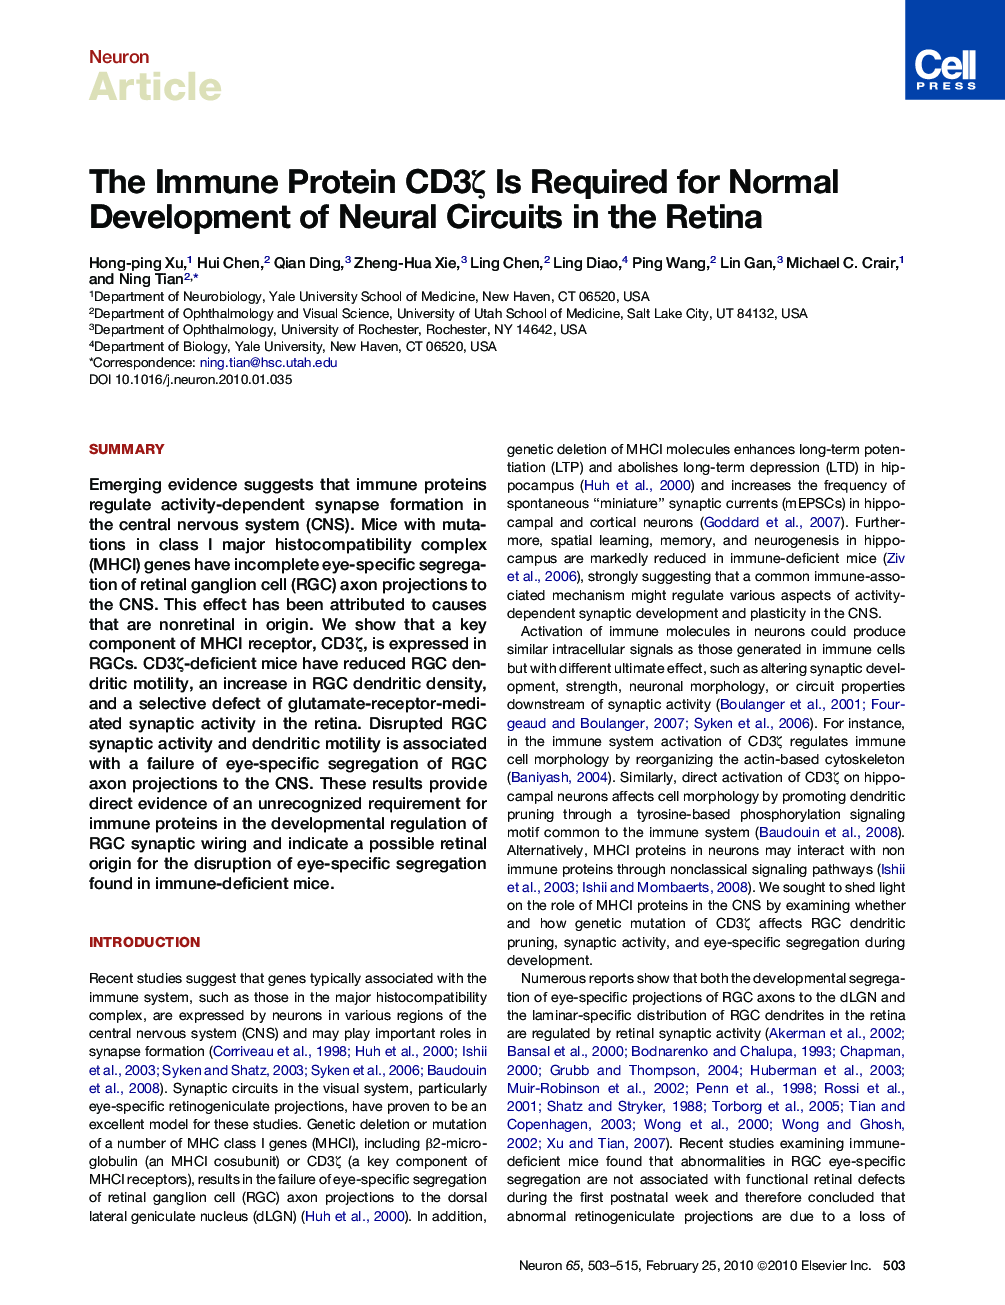 The Immune Protein CD3ζ Is Required for Normal Development of Neural Circuits in the Retina